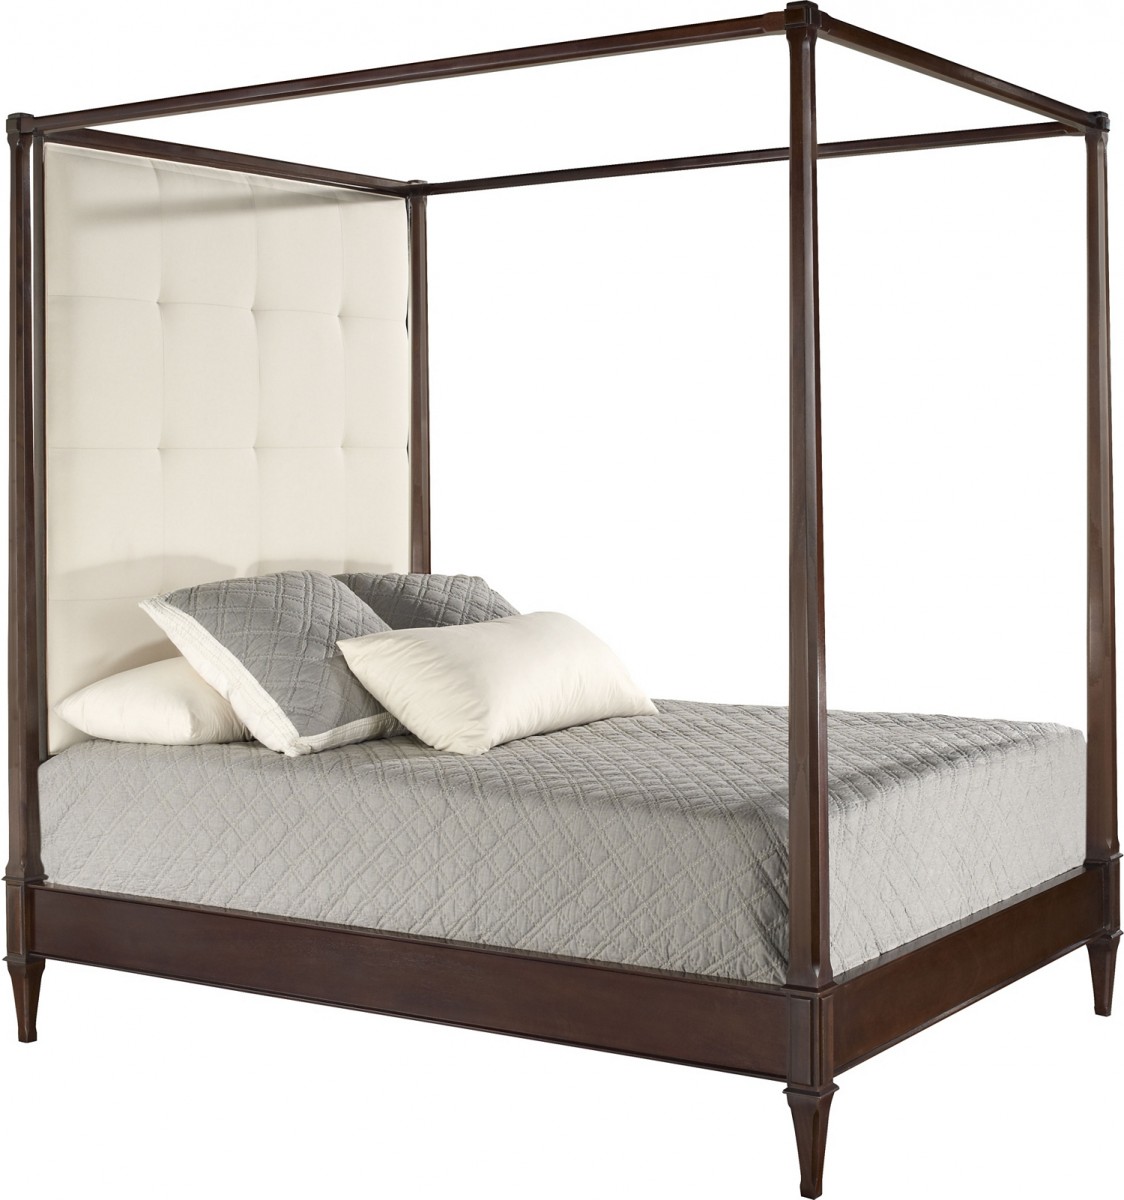 Artisan Poster Bed - Mahogany with Tall Biscuit-Stitched Uph. Headboard